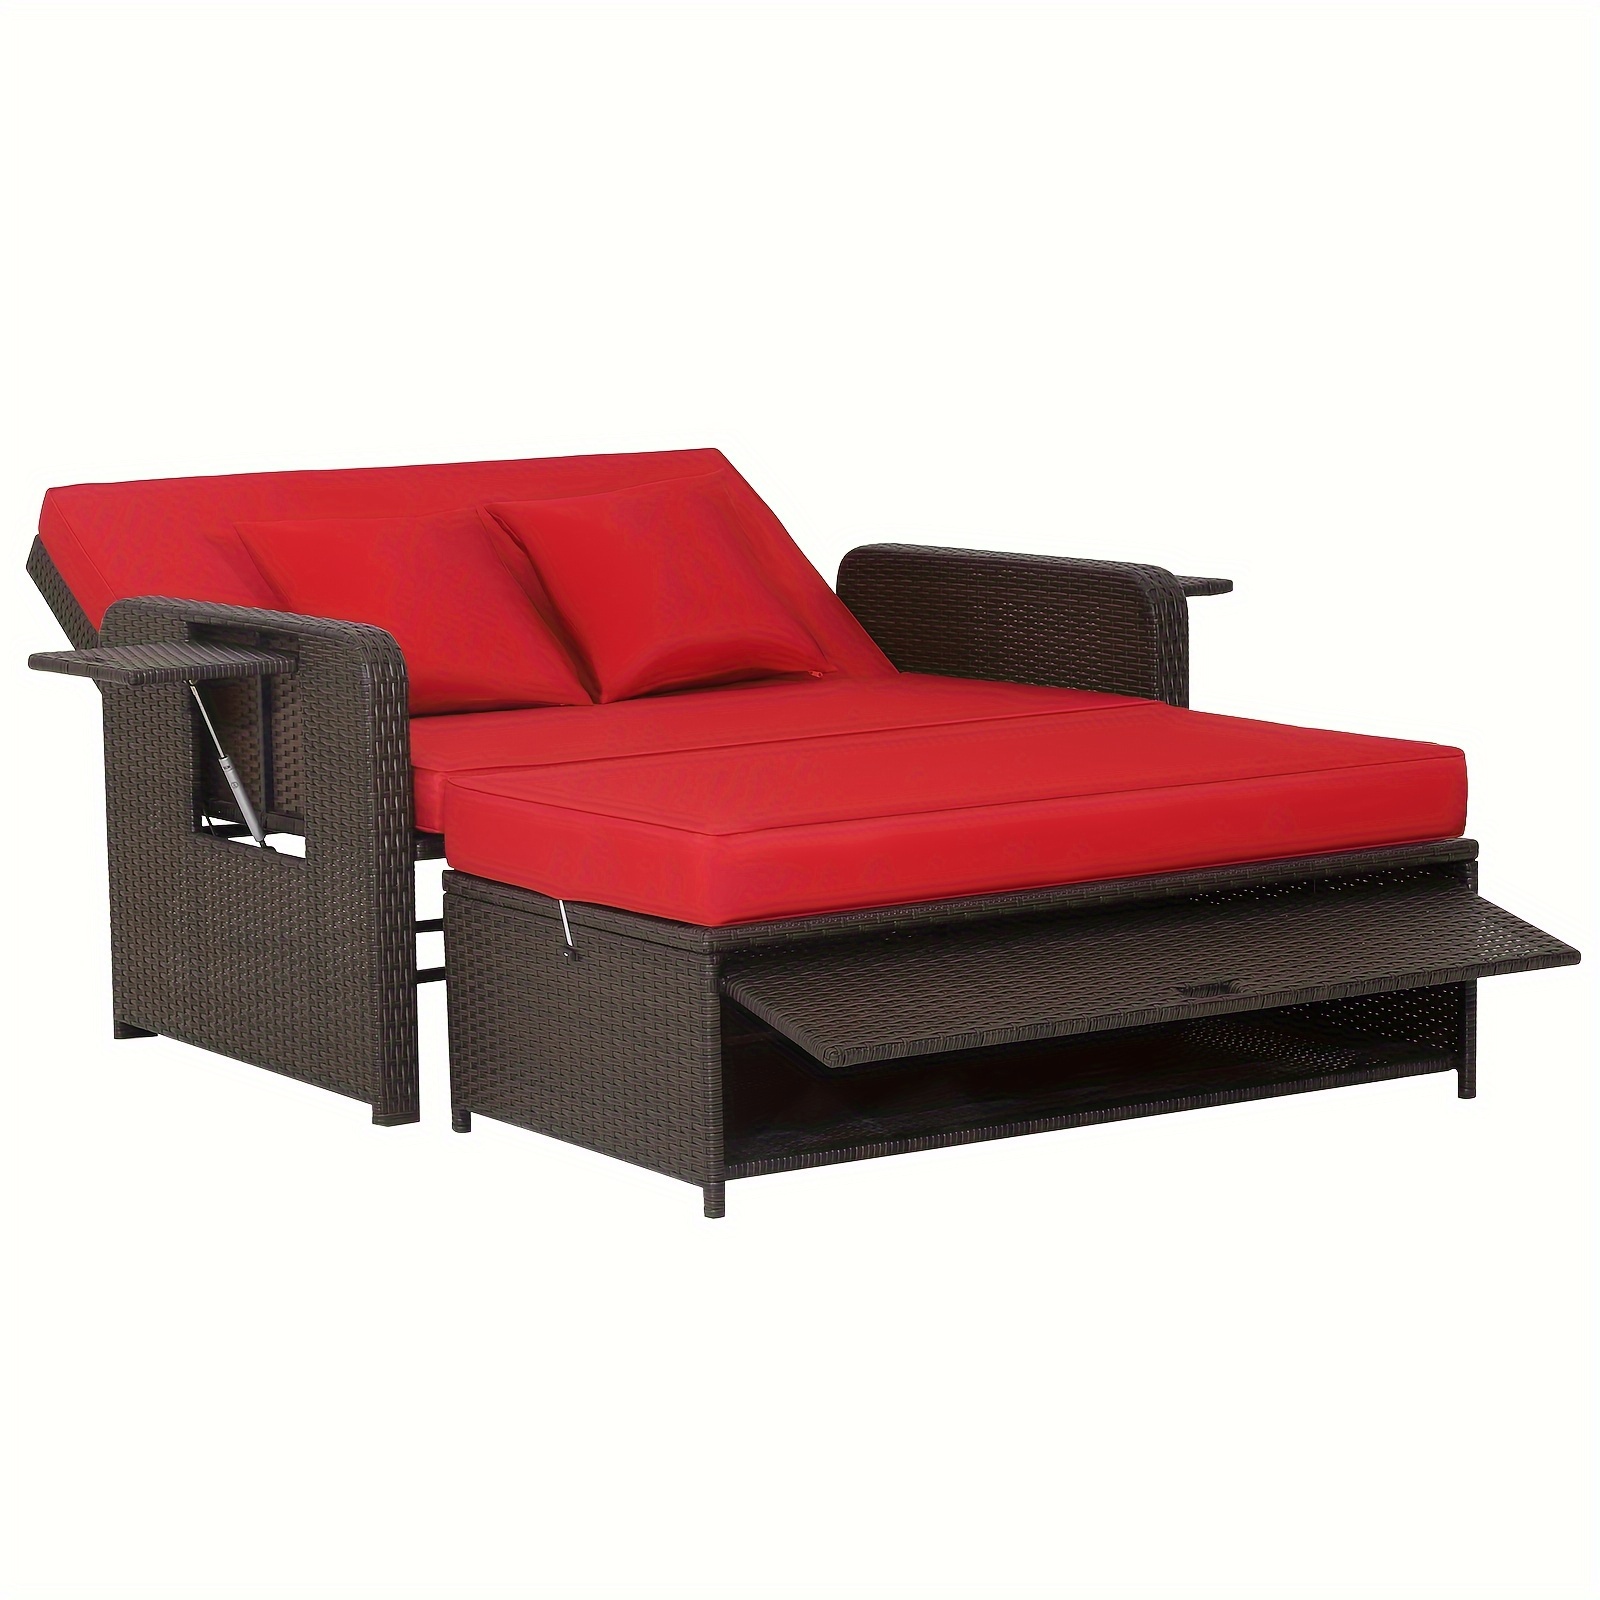 

1pc Adjustable Patio Rattan Loveseat Set, Classic Style Daybed Lounge With Storage Ottoman And Side Tables, Metal Frame, Red Cushions, Outdoor Furniture